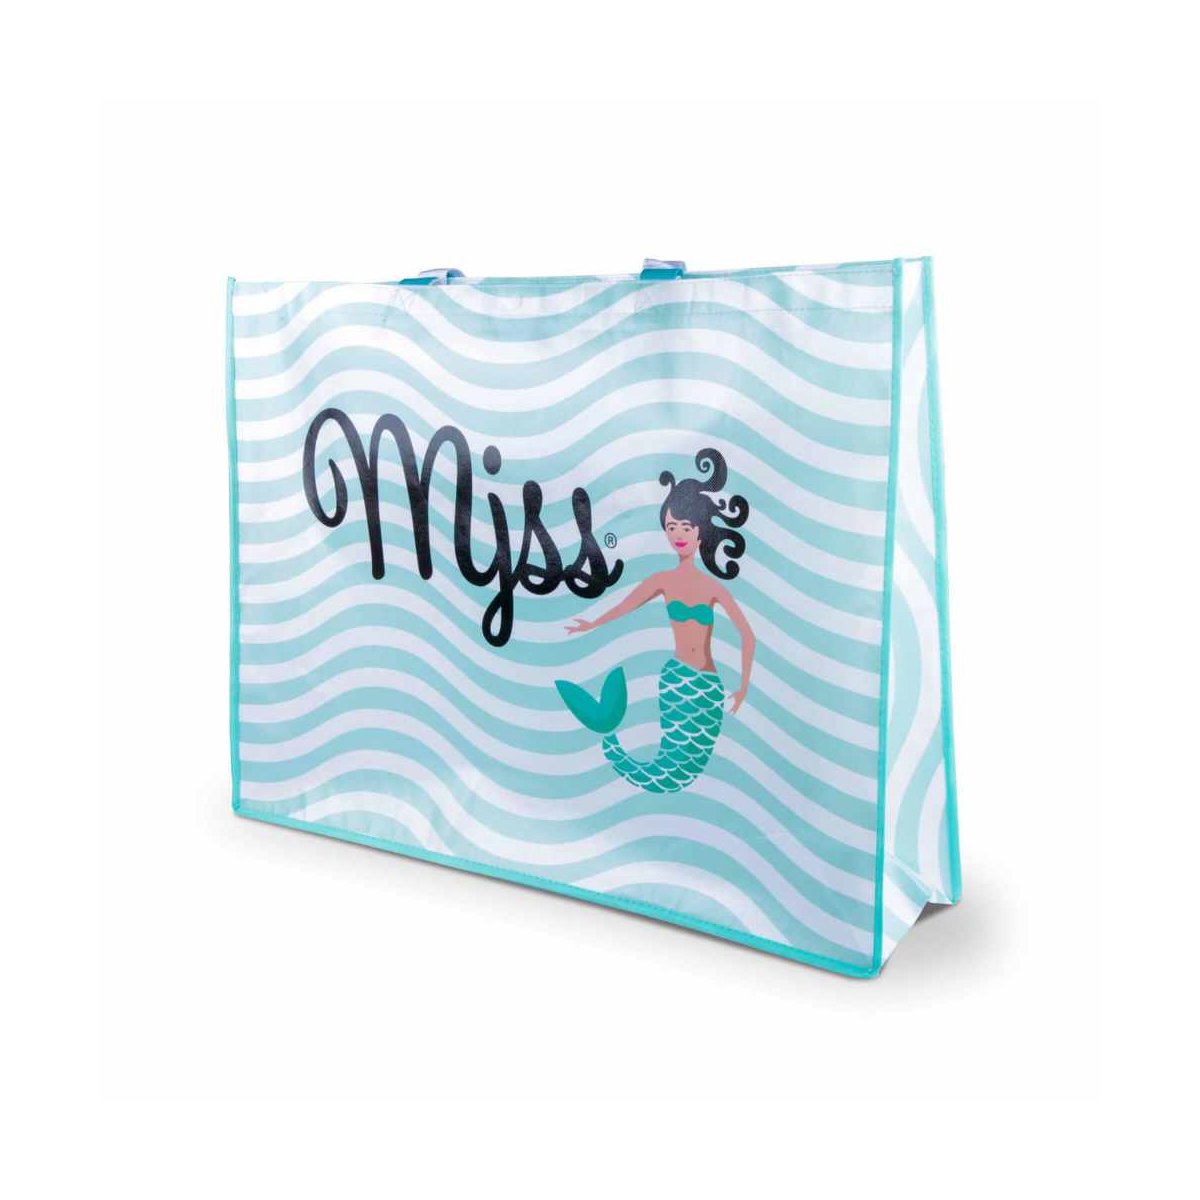 The functional mermaid carring bag from MJSS - Mermaid carring bag to do the groceries!